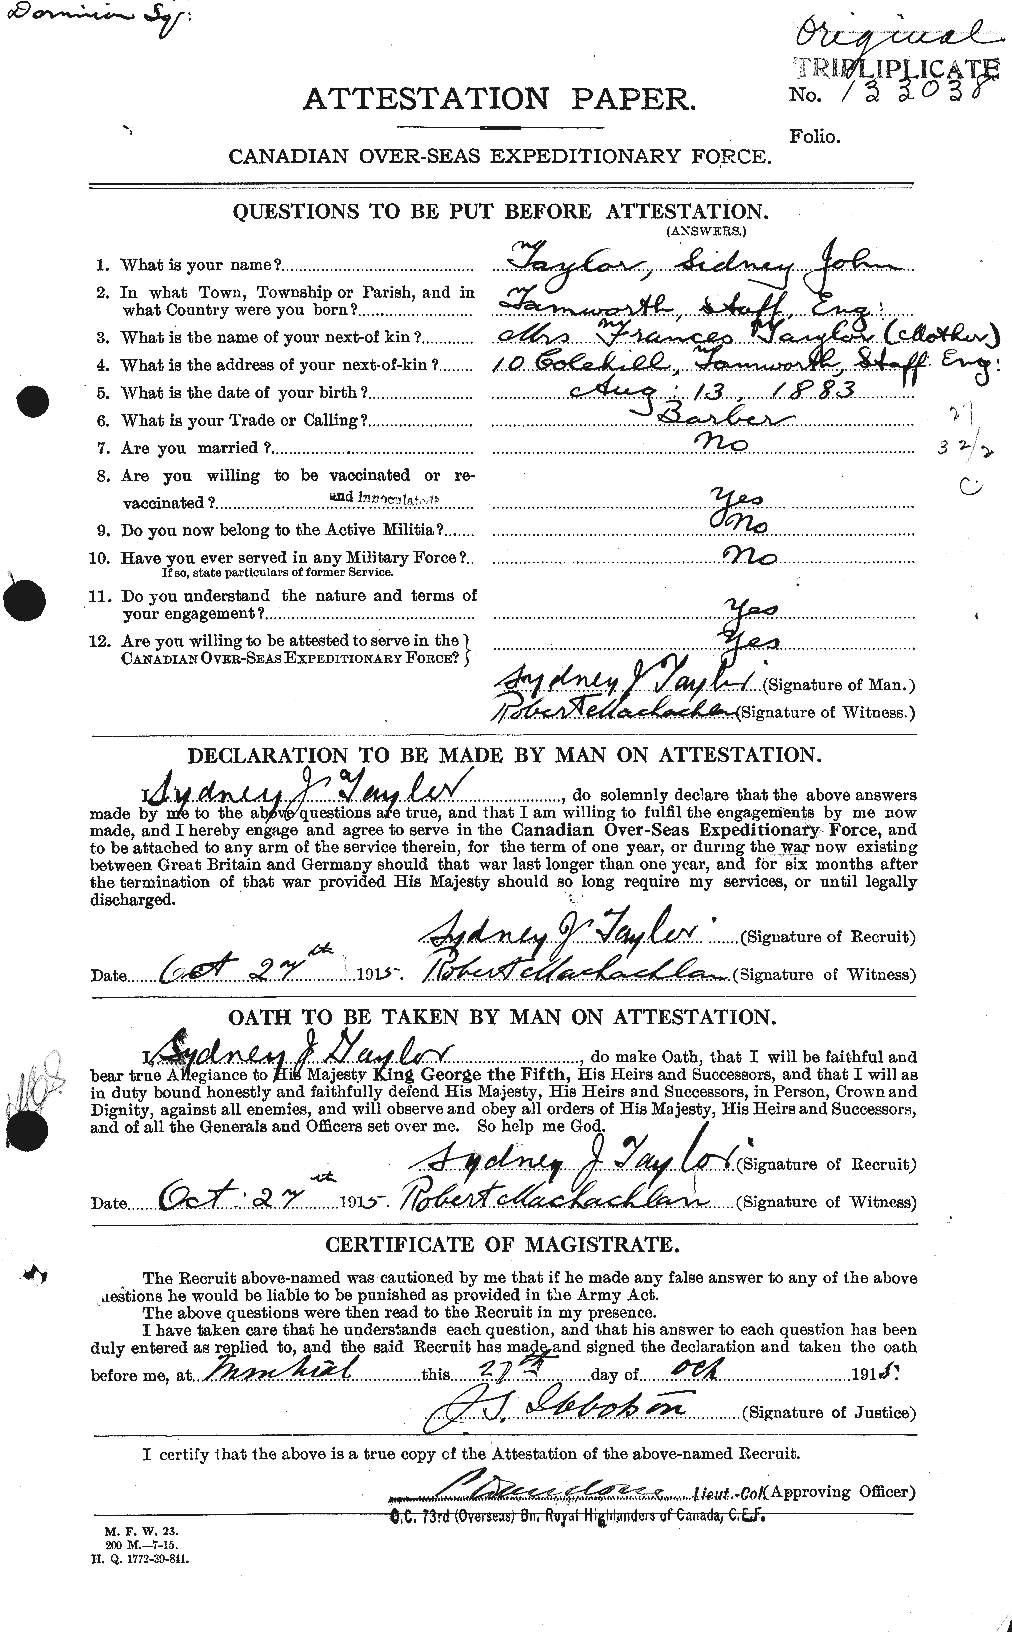 Personnel Records of the First World War - CEF 627902a